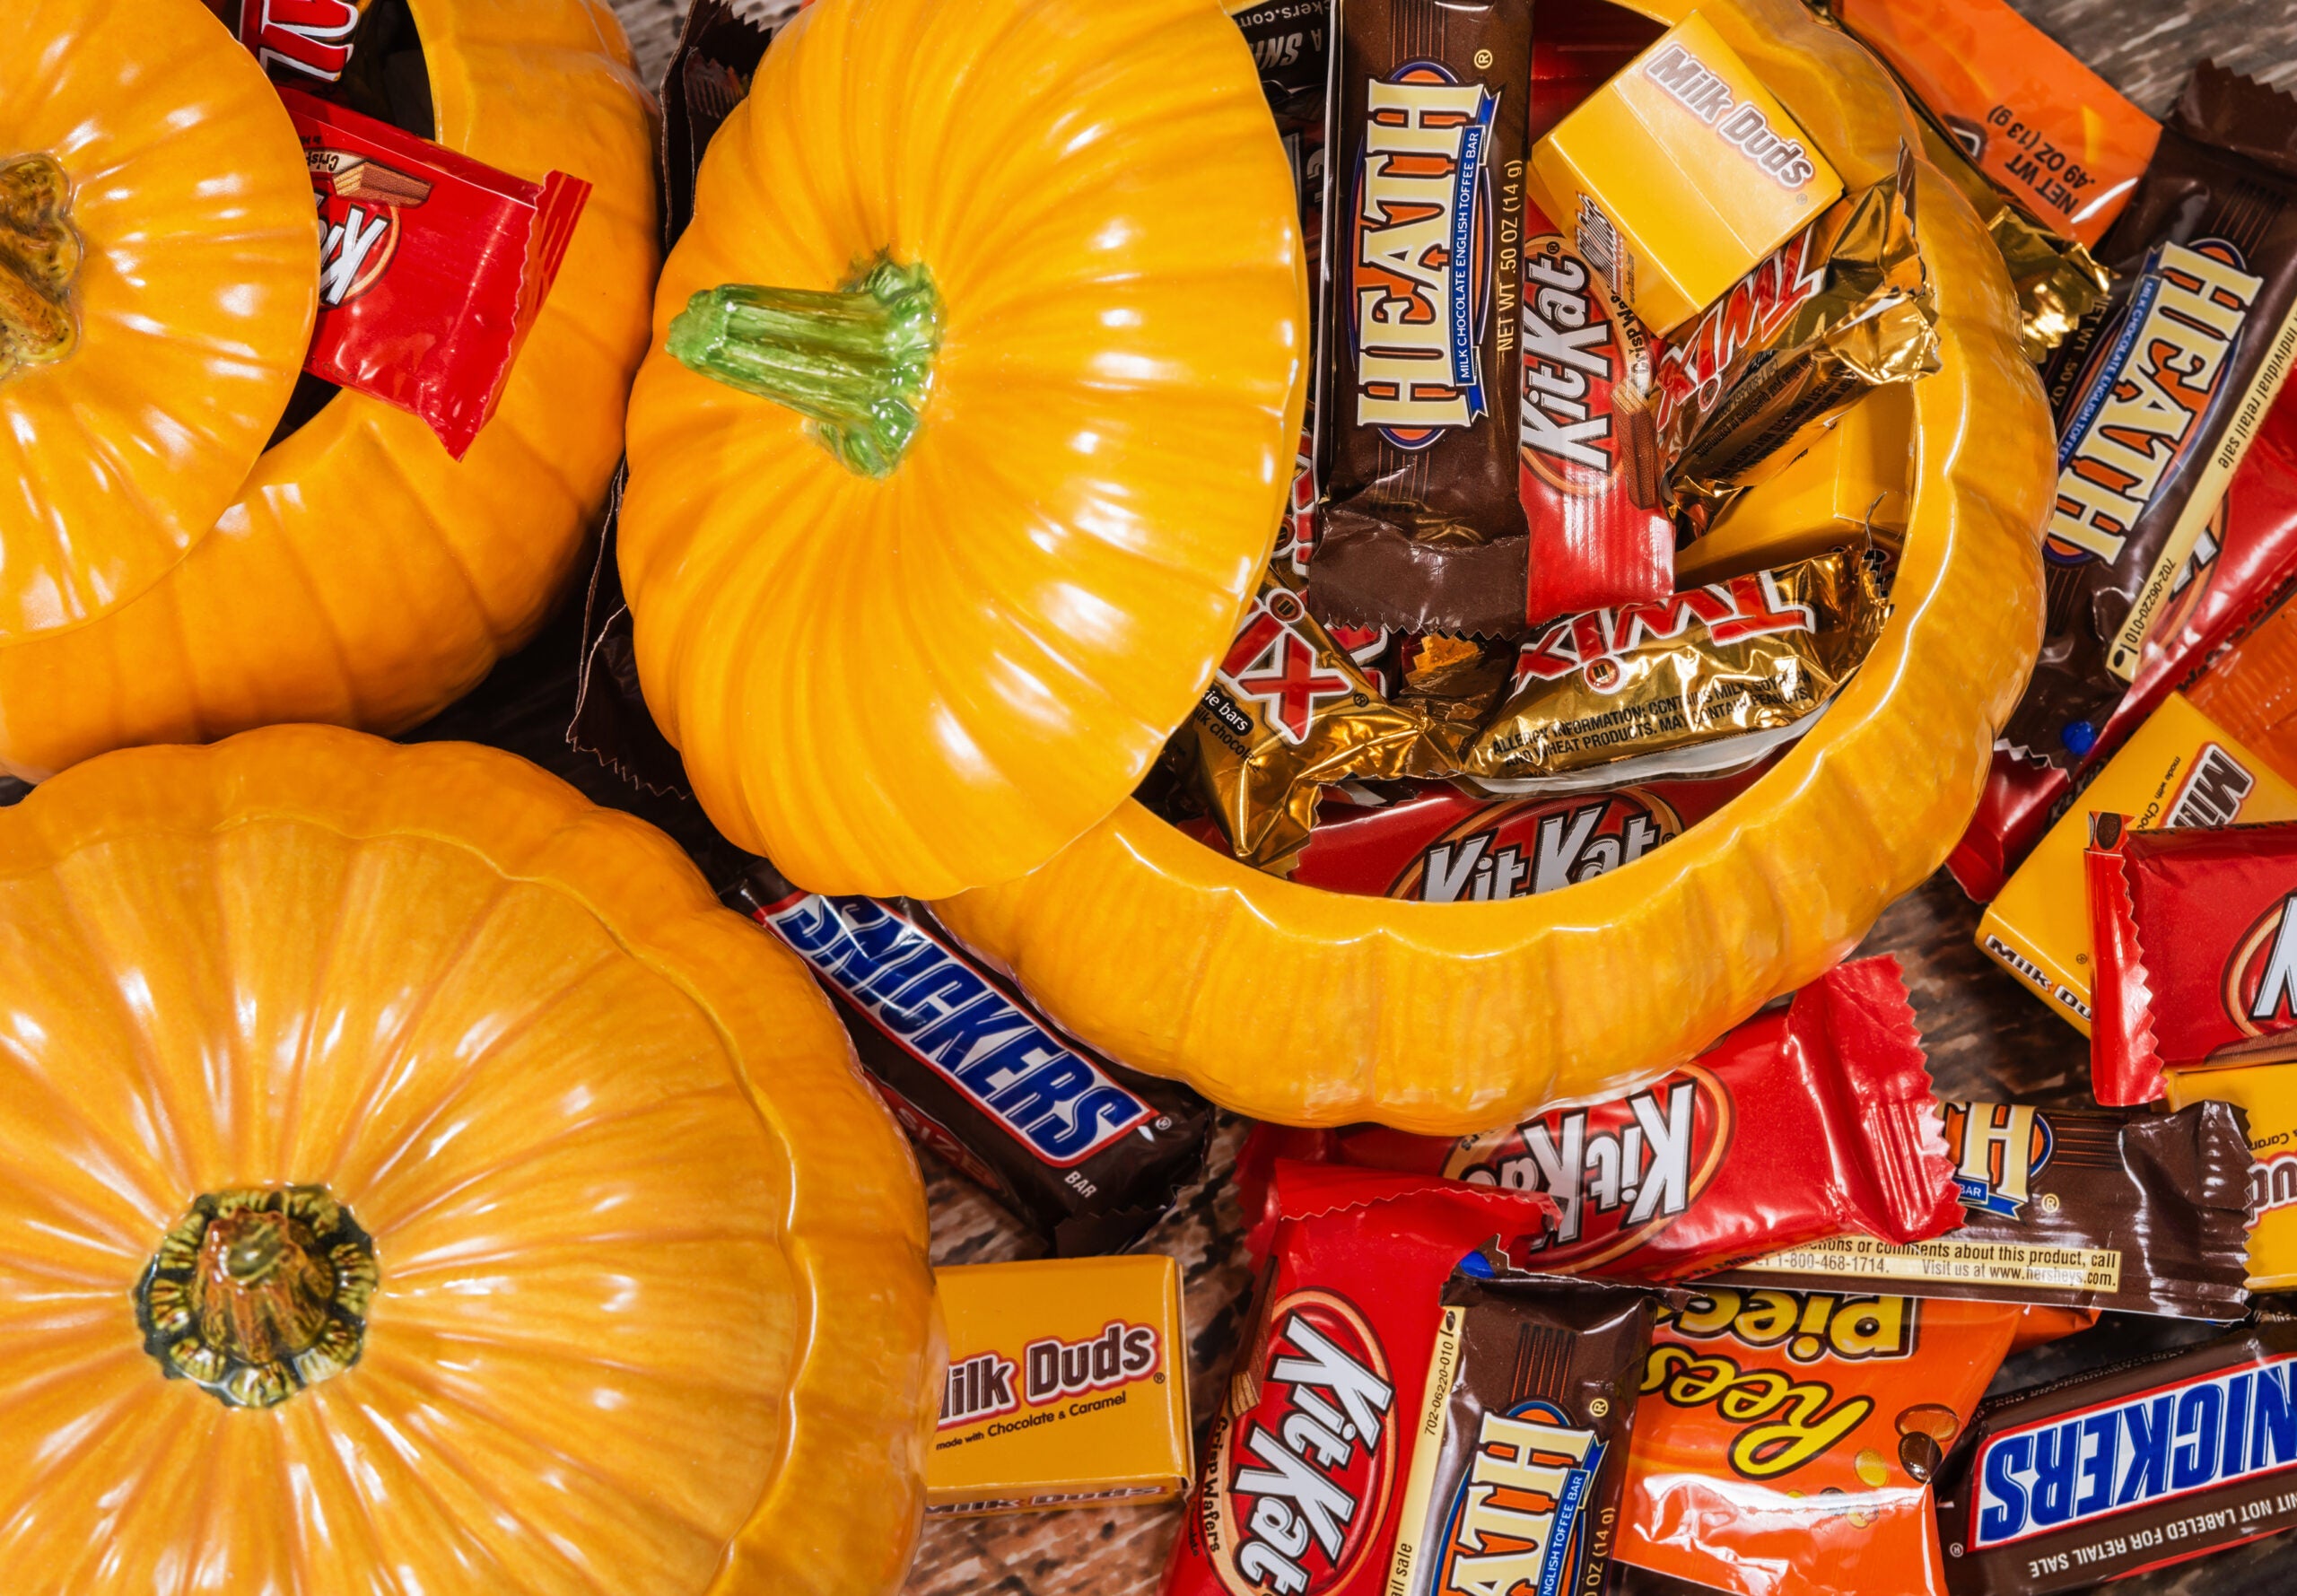 Decorative pumpkins filled with assorted Halloween chocolate can